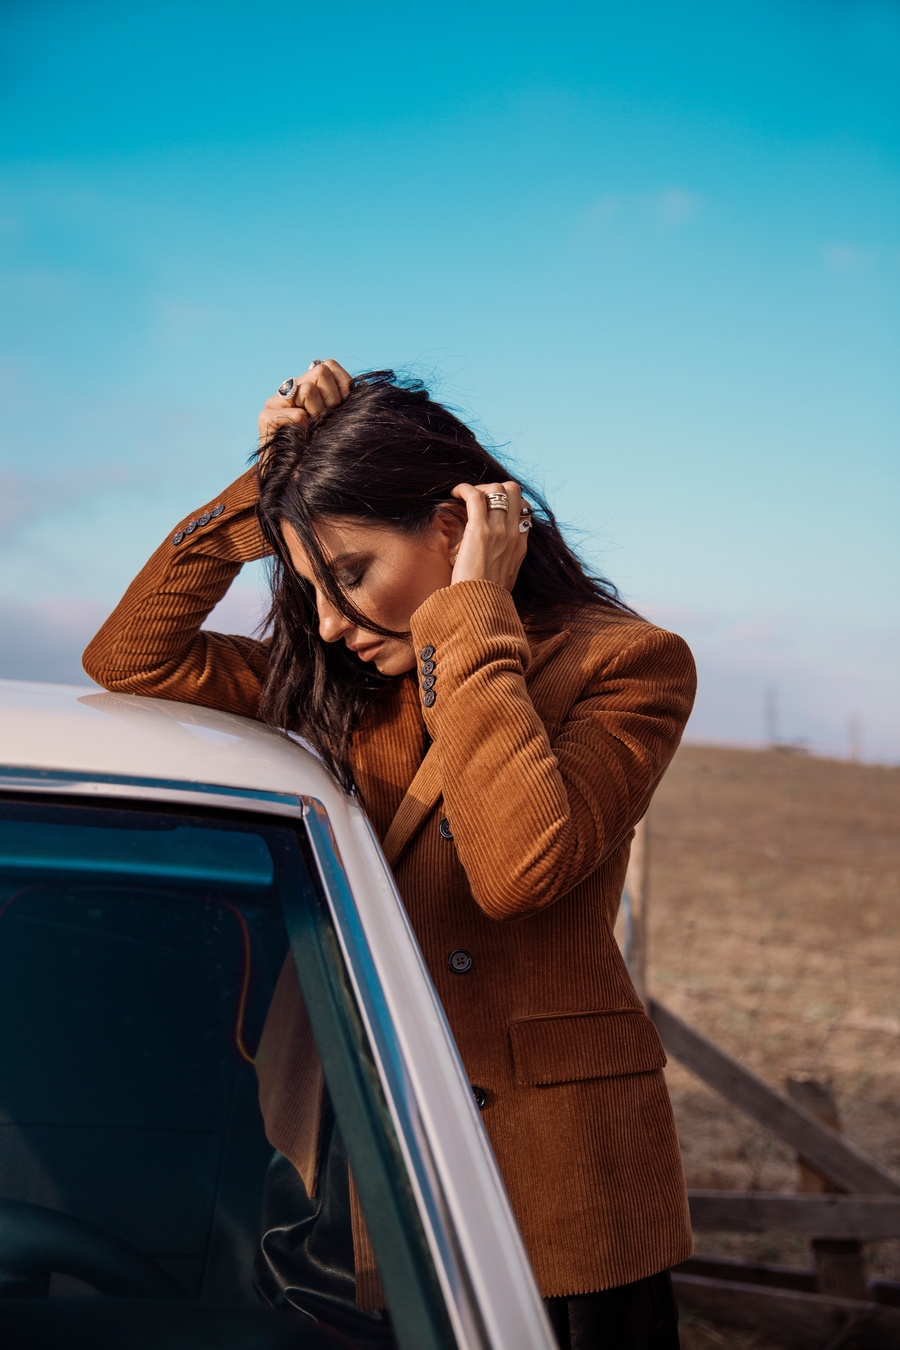 20 year old woman in a brown jacket, looking down at her car. She has long hair and is wearing black pants